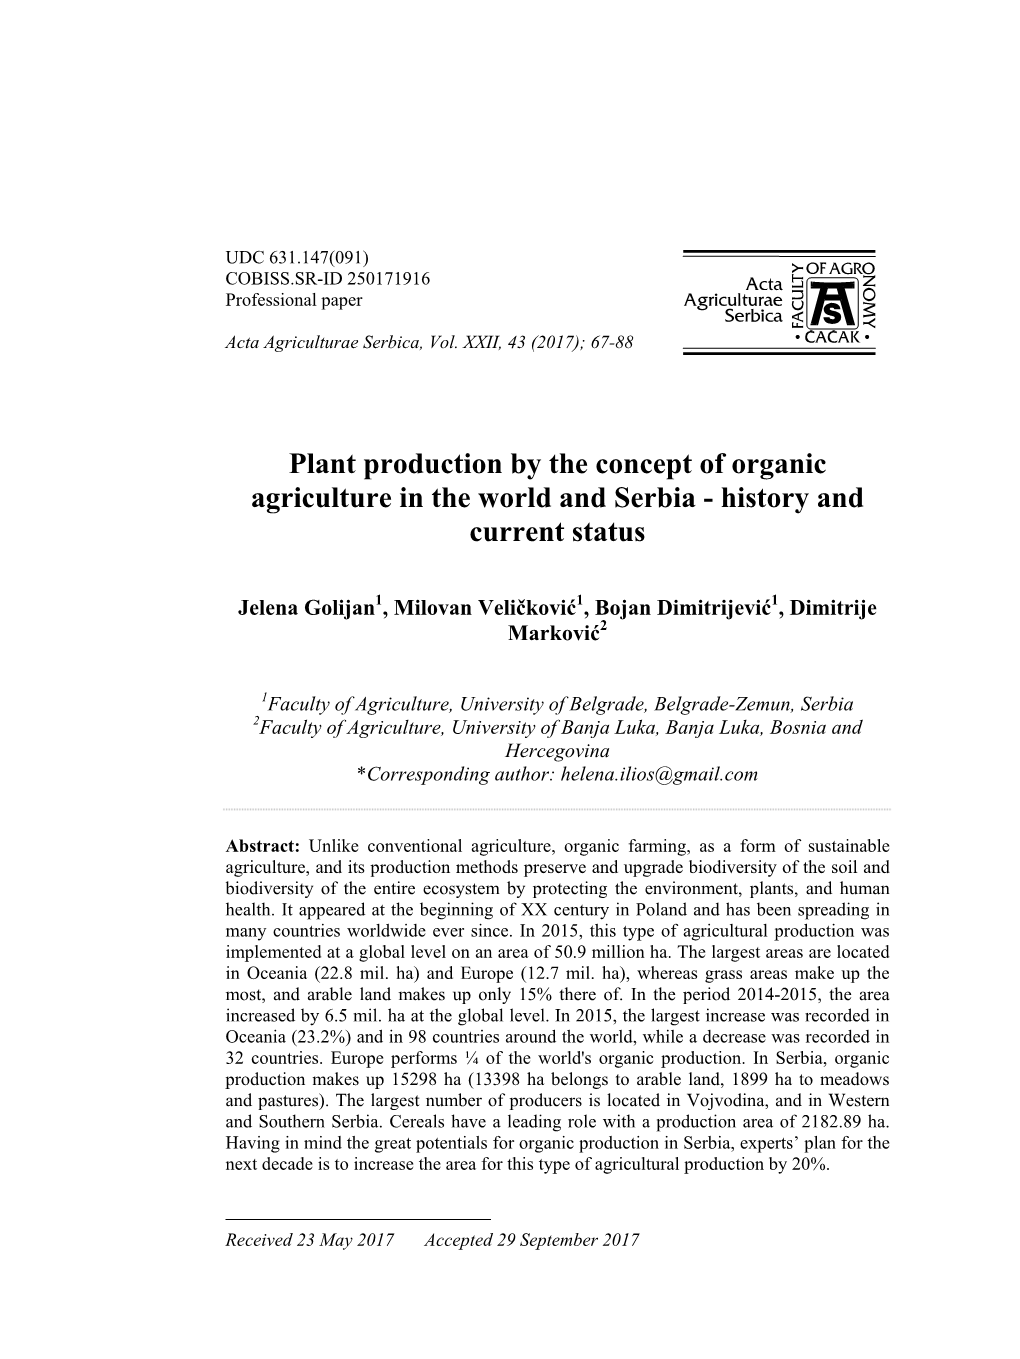 Plant Production by the Concept of Organic Agriculture in the World and Serbia - History and Current Status